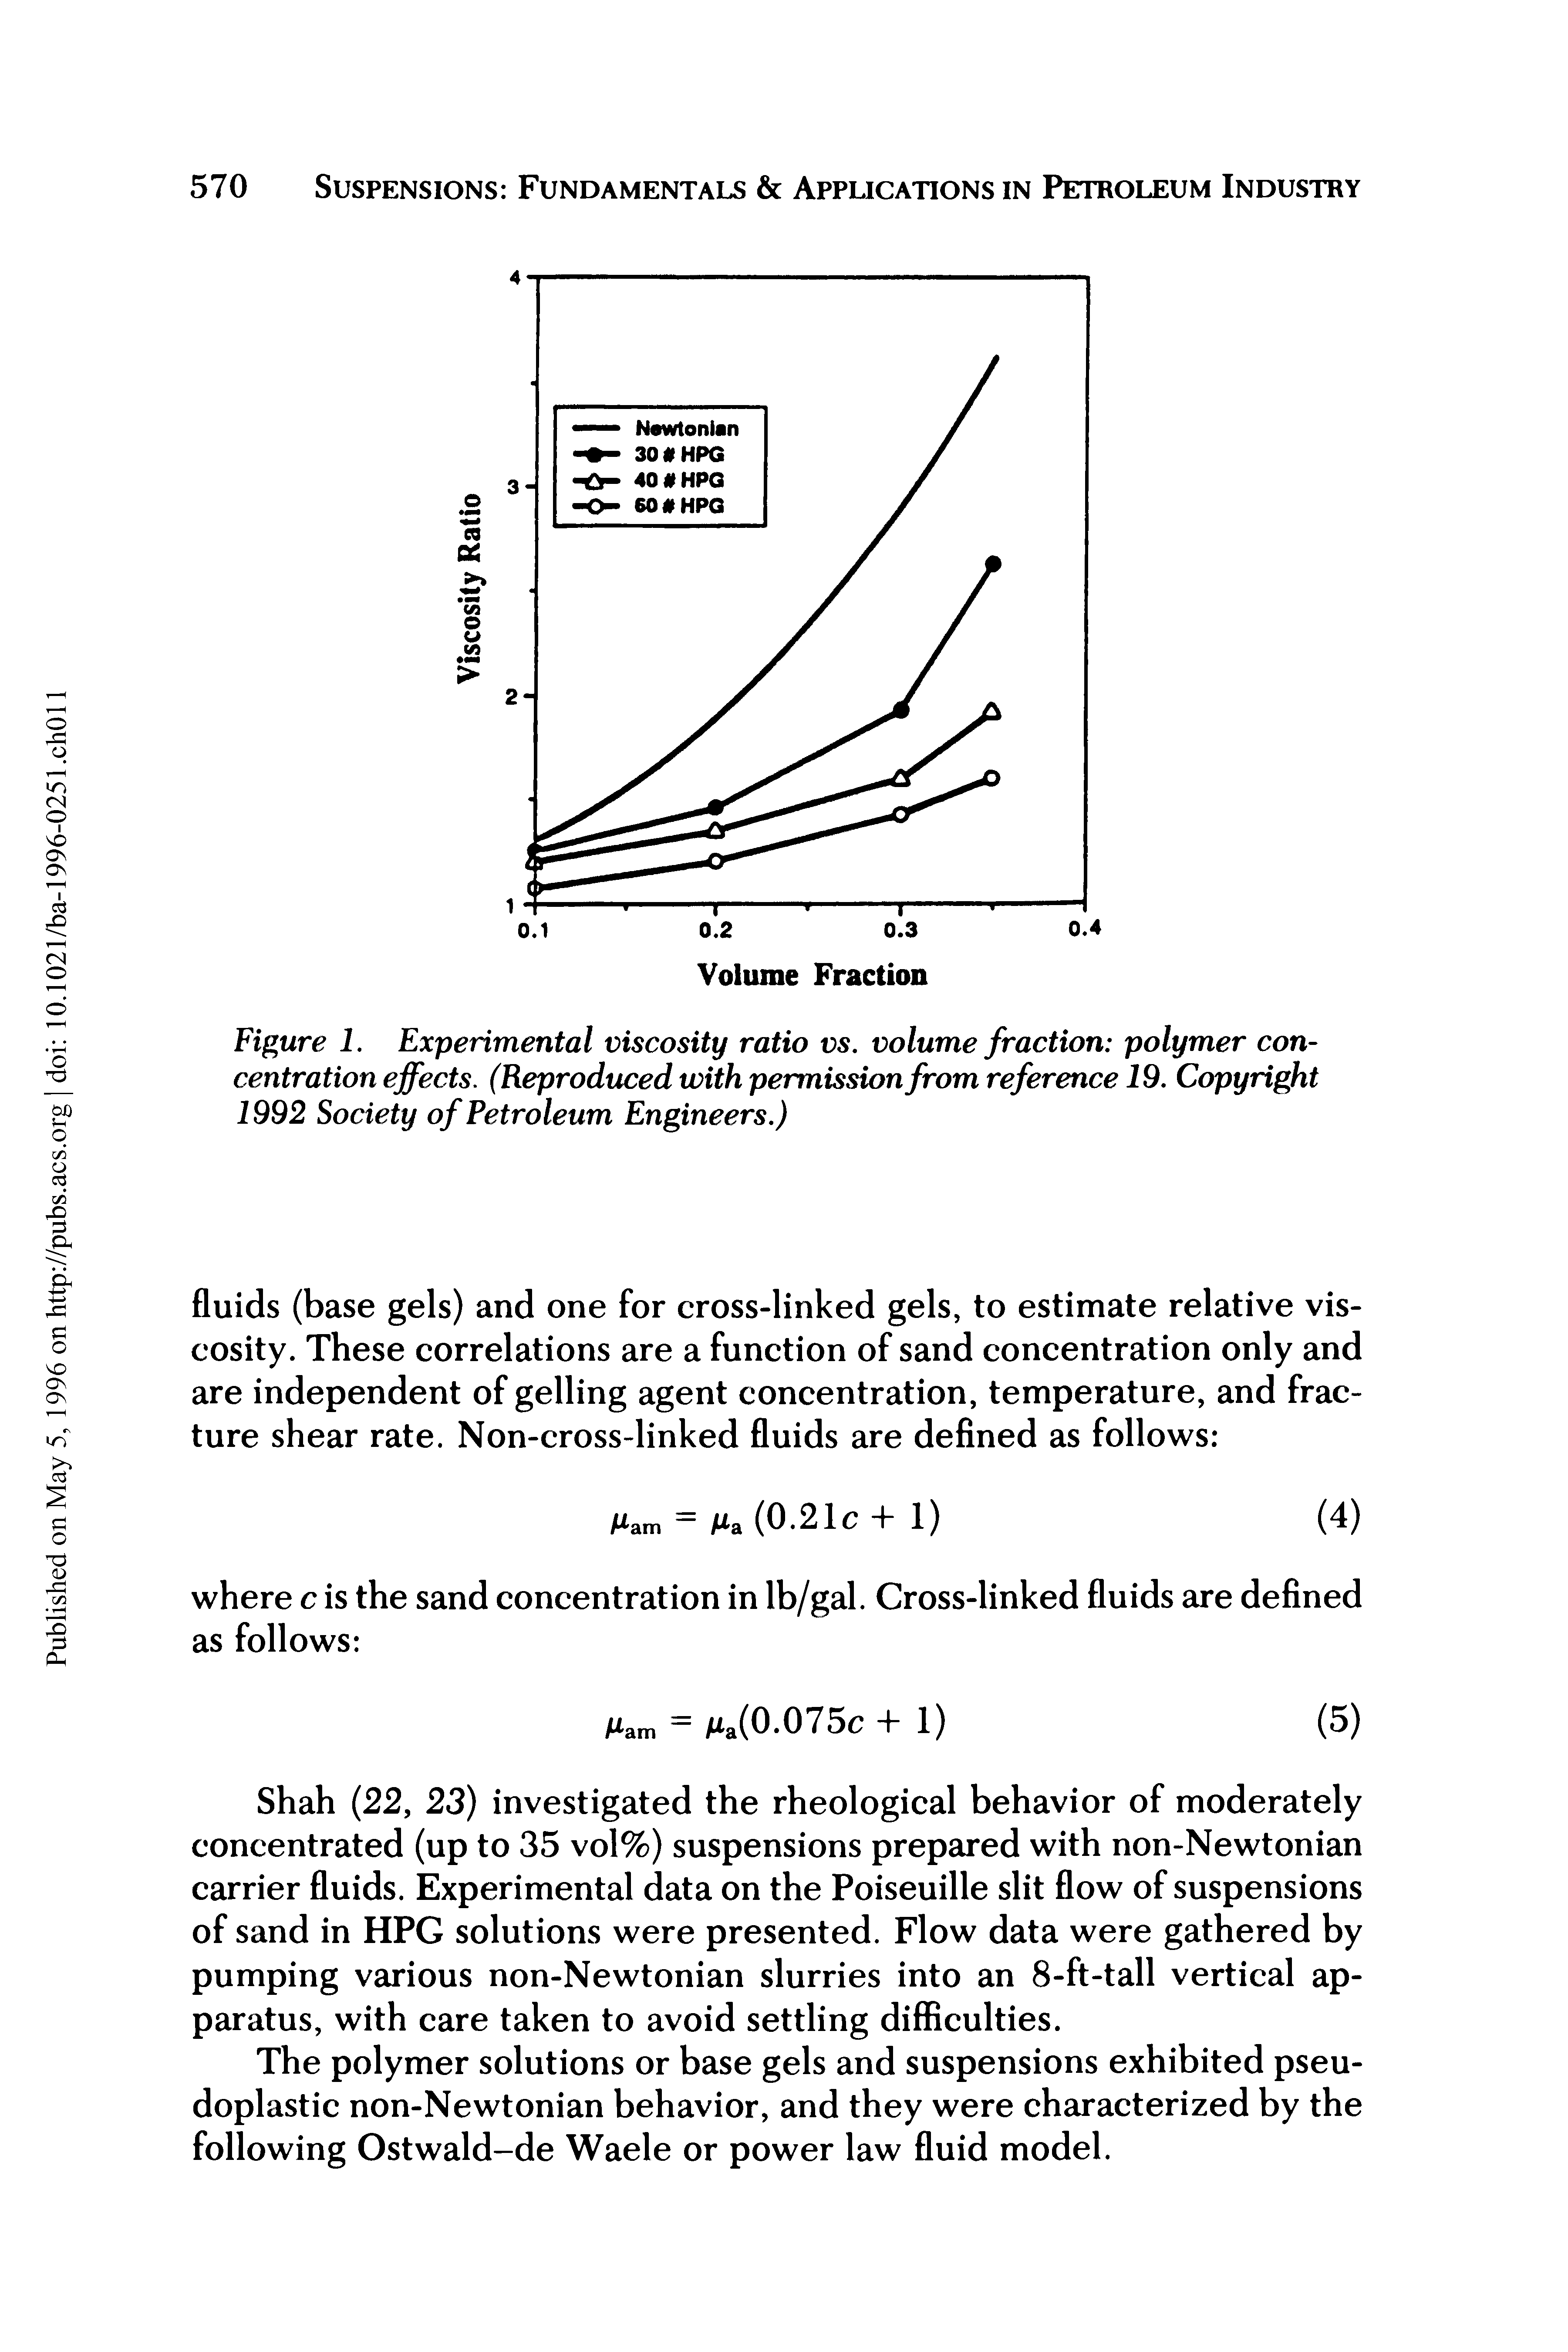 Figure 1. Experimental viscosity ratio vs. volume fraction polymer concentration effects. (Reproduced with permission from reference 19. Copyright 1992 Society of Petroleum Engineers.)...